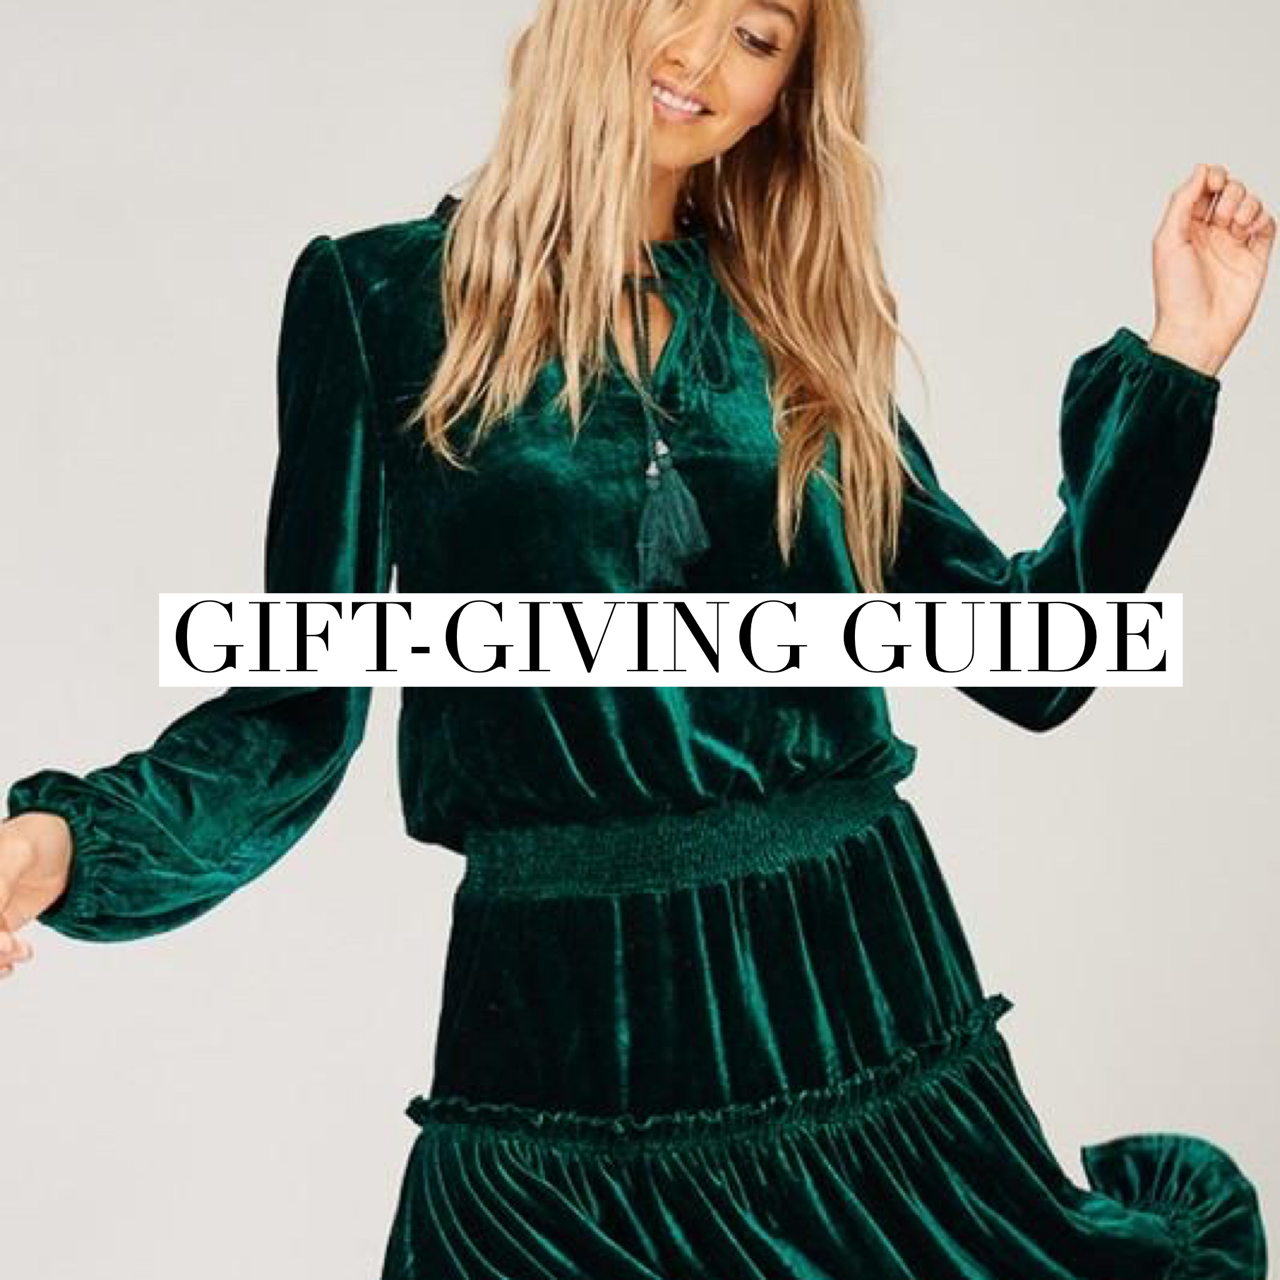 YOUR GIFT GIVING GUIDE FOR HER